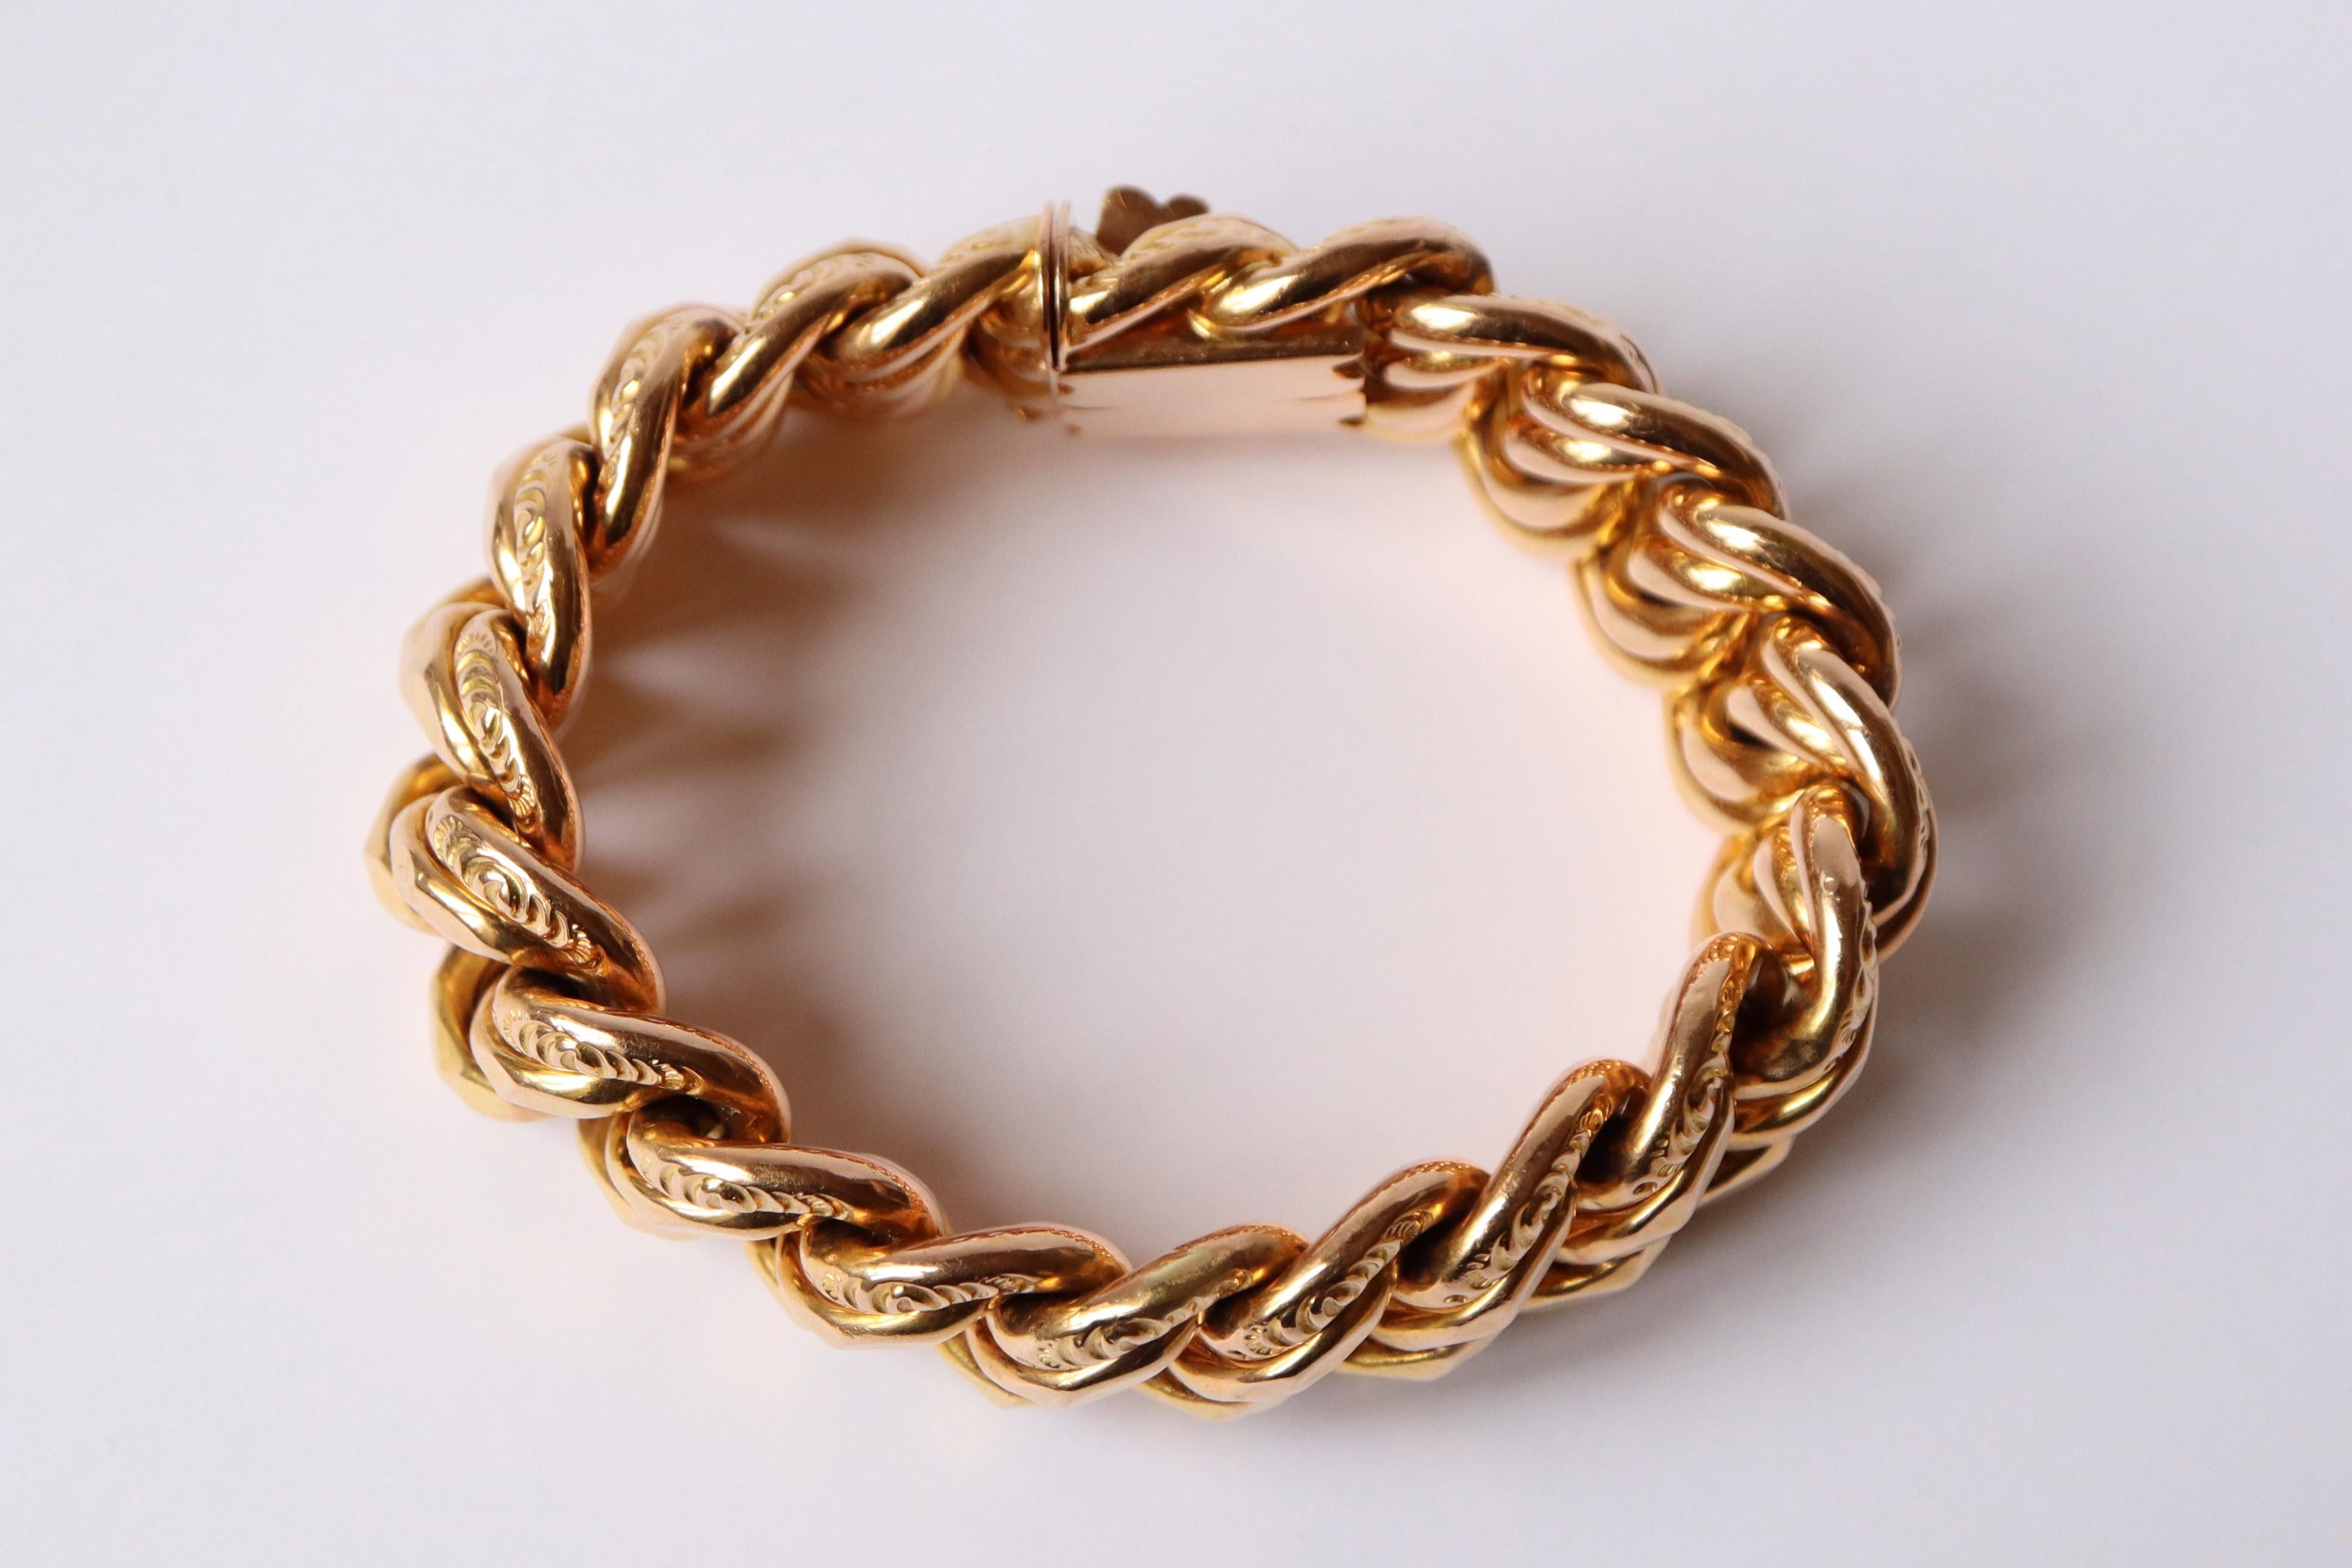 Bracelet circa 1970 in 18K yellow gold American double link hammered 
Length: 20 cm Width: 2.3 cm
Safety eight 
Eagle Head hallmark
Net weight: 66.6g
